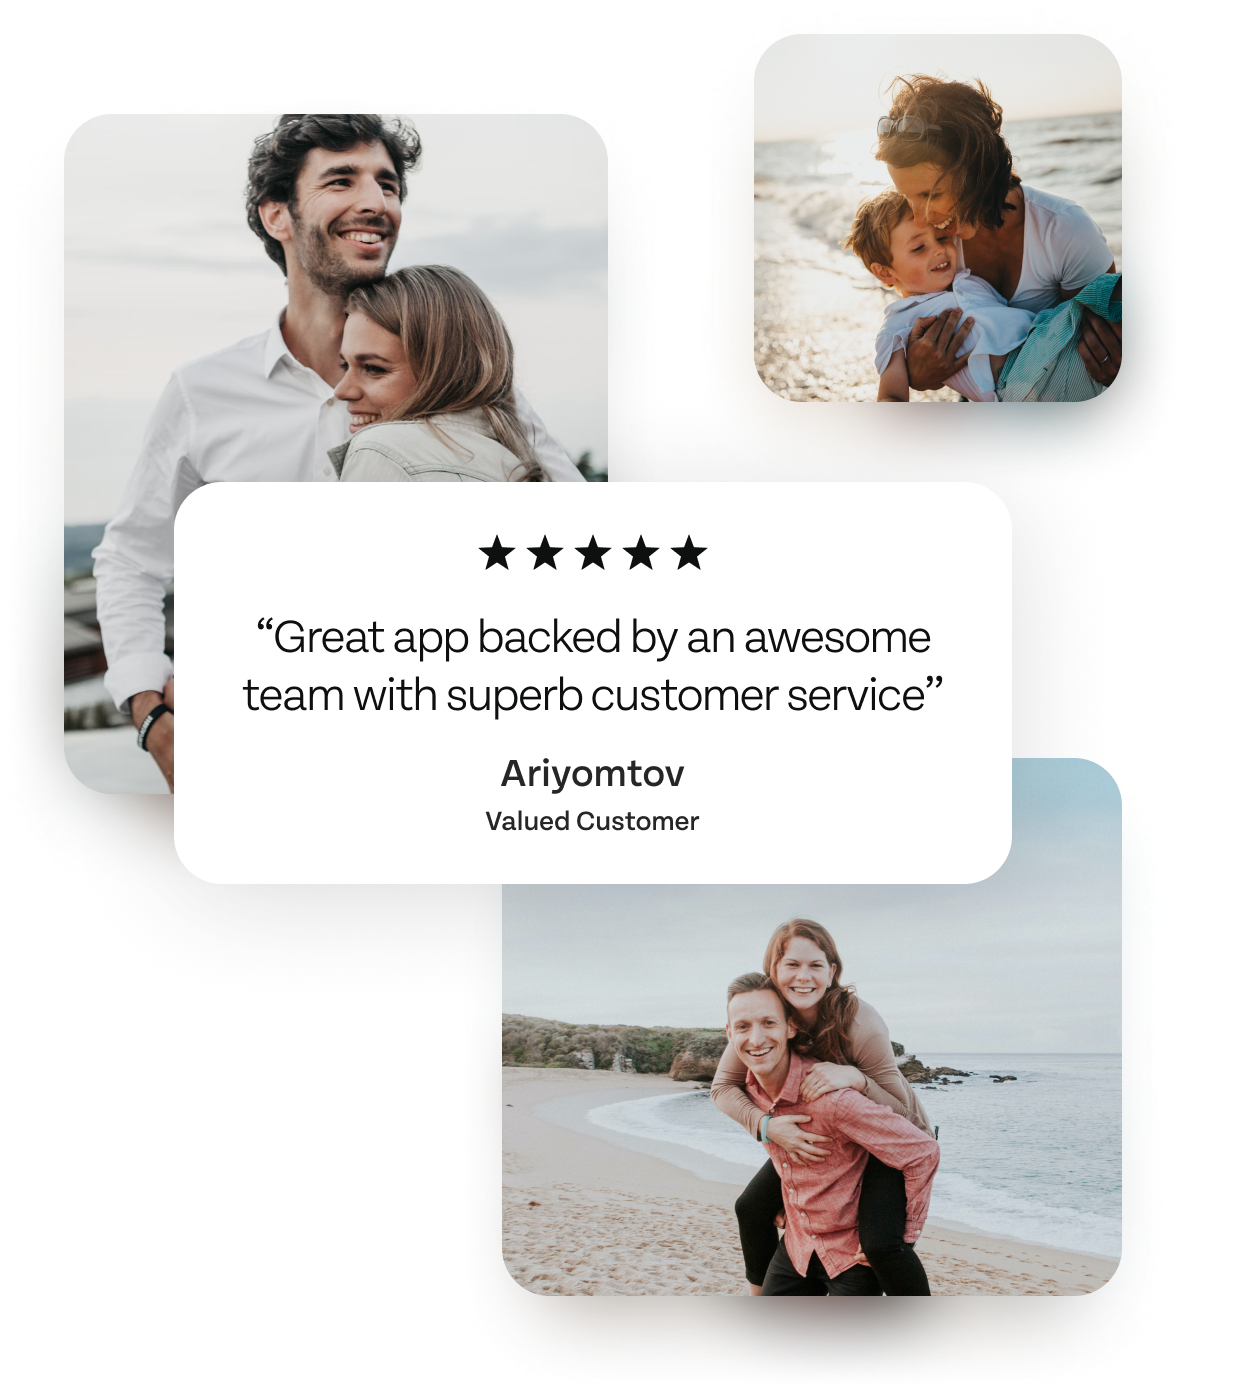 Background image with happy people and on the top a Quote from Ariyomtov that says "Great app backed by an awesome team with superb customer service"